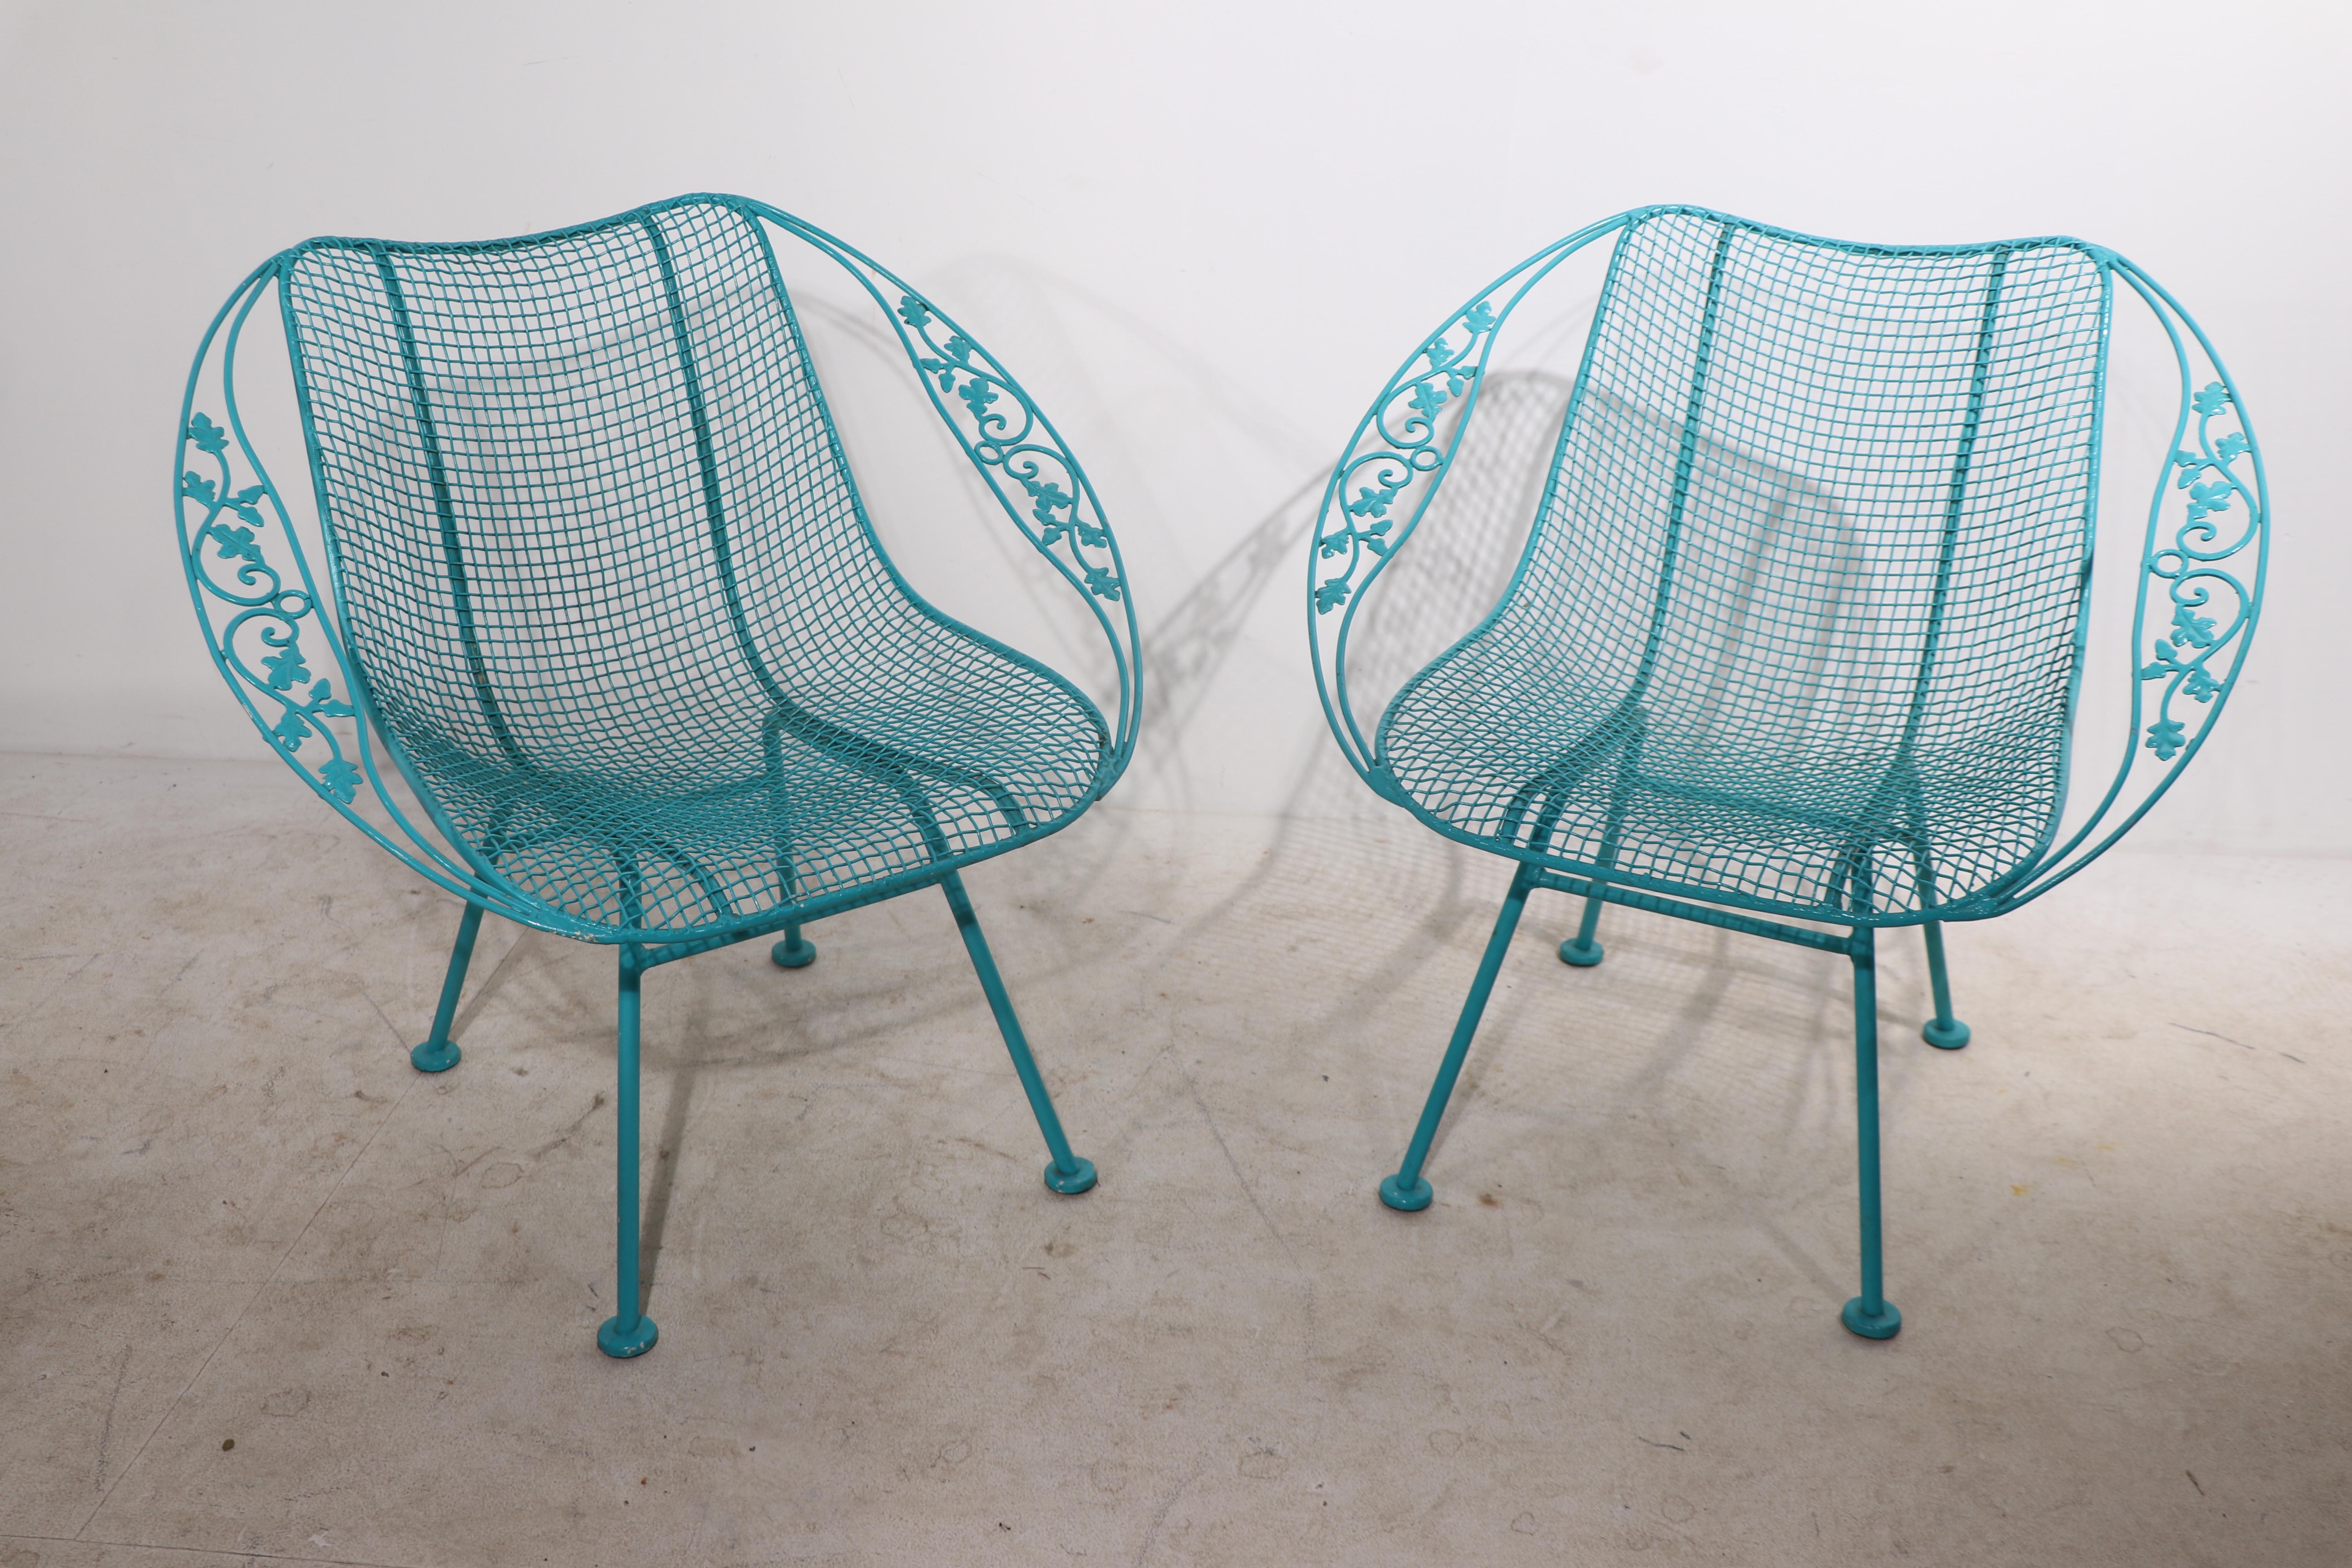 Exceptional pair of Woodard Sculpture Satellite lounge chairs, in turquoise paint finish. Both are in very good condition, clean and ready to use. We offer custom powder coating if you prefer a different finish. Offered and priced as a pair. 
